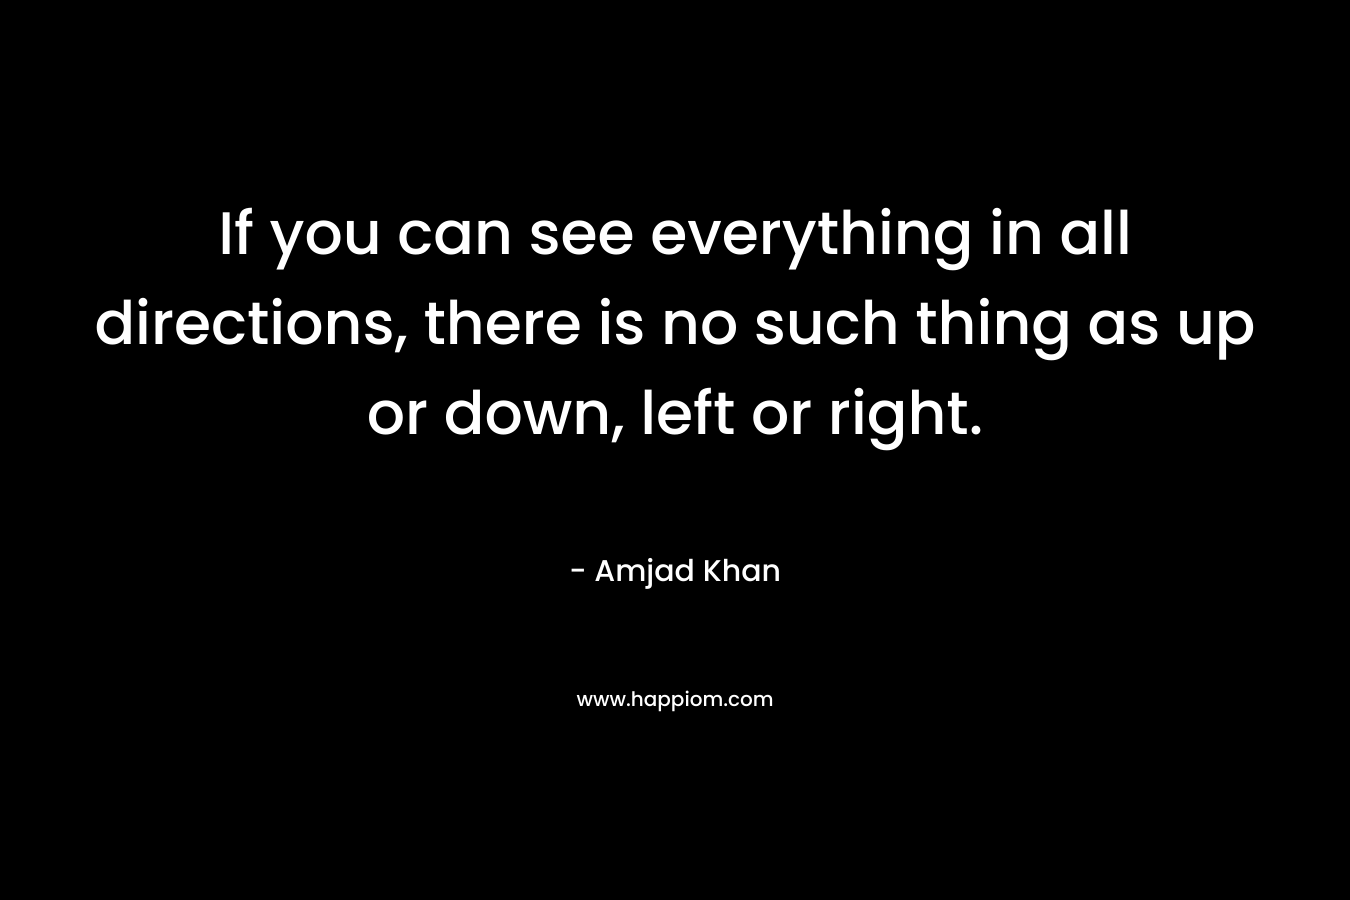 If you can see everything in all directions, there is no such thing as up or down, left or right.